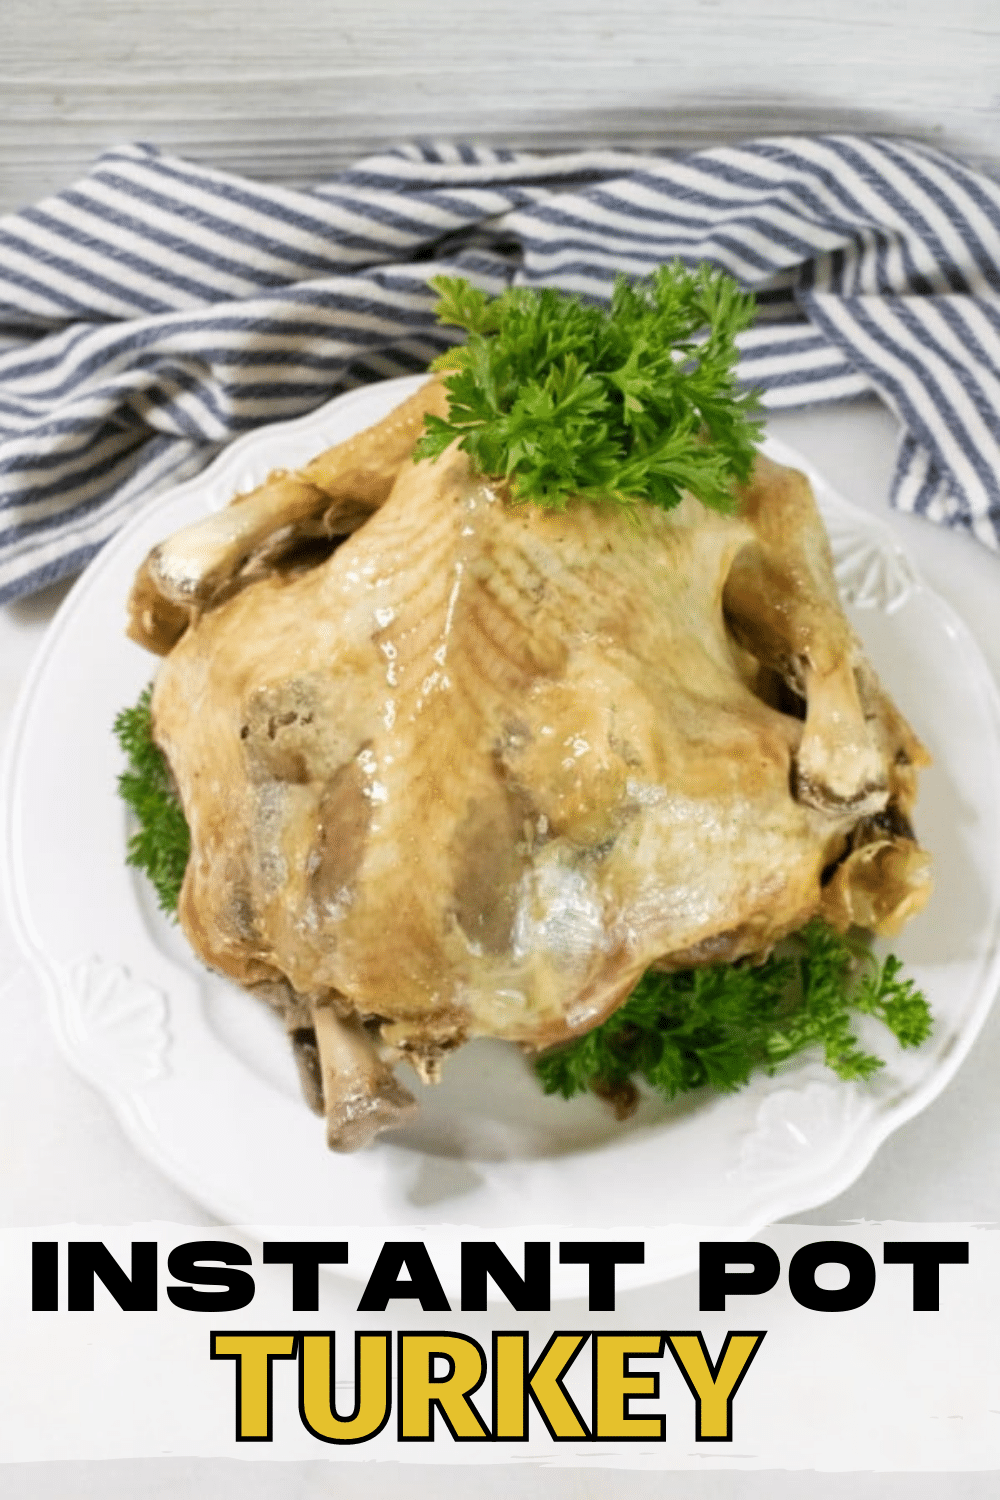 This Instant Pot Turkey turns out perfect and leaves your oven open for side dishes! #Thanksgiving #instantpot #turkey via @wondermomwannab